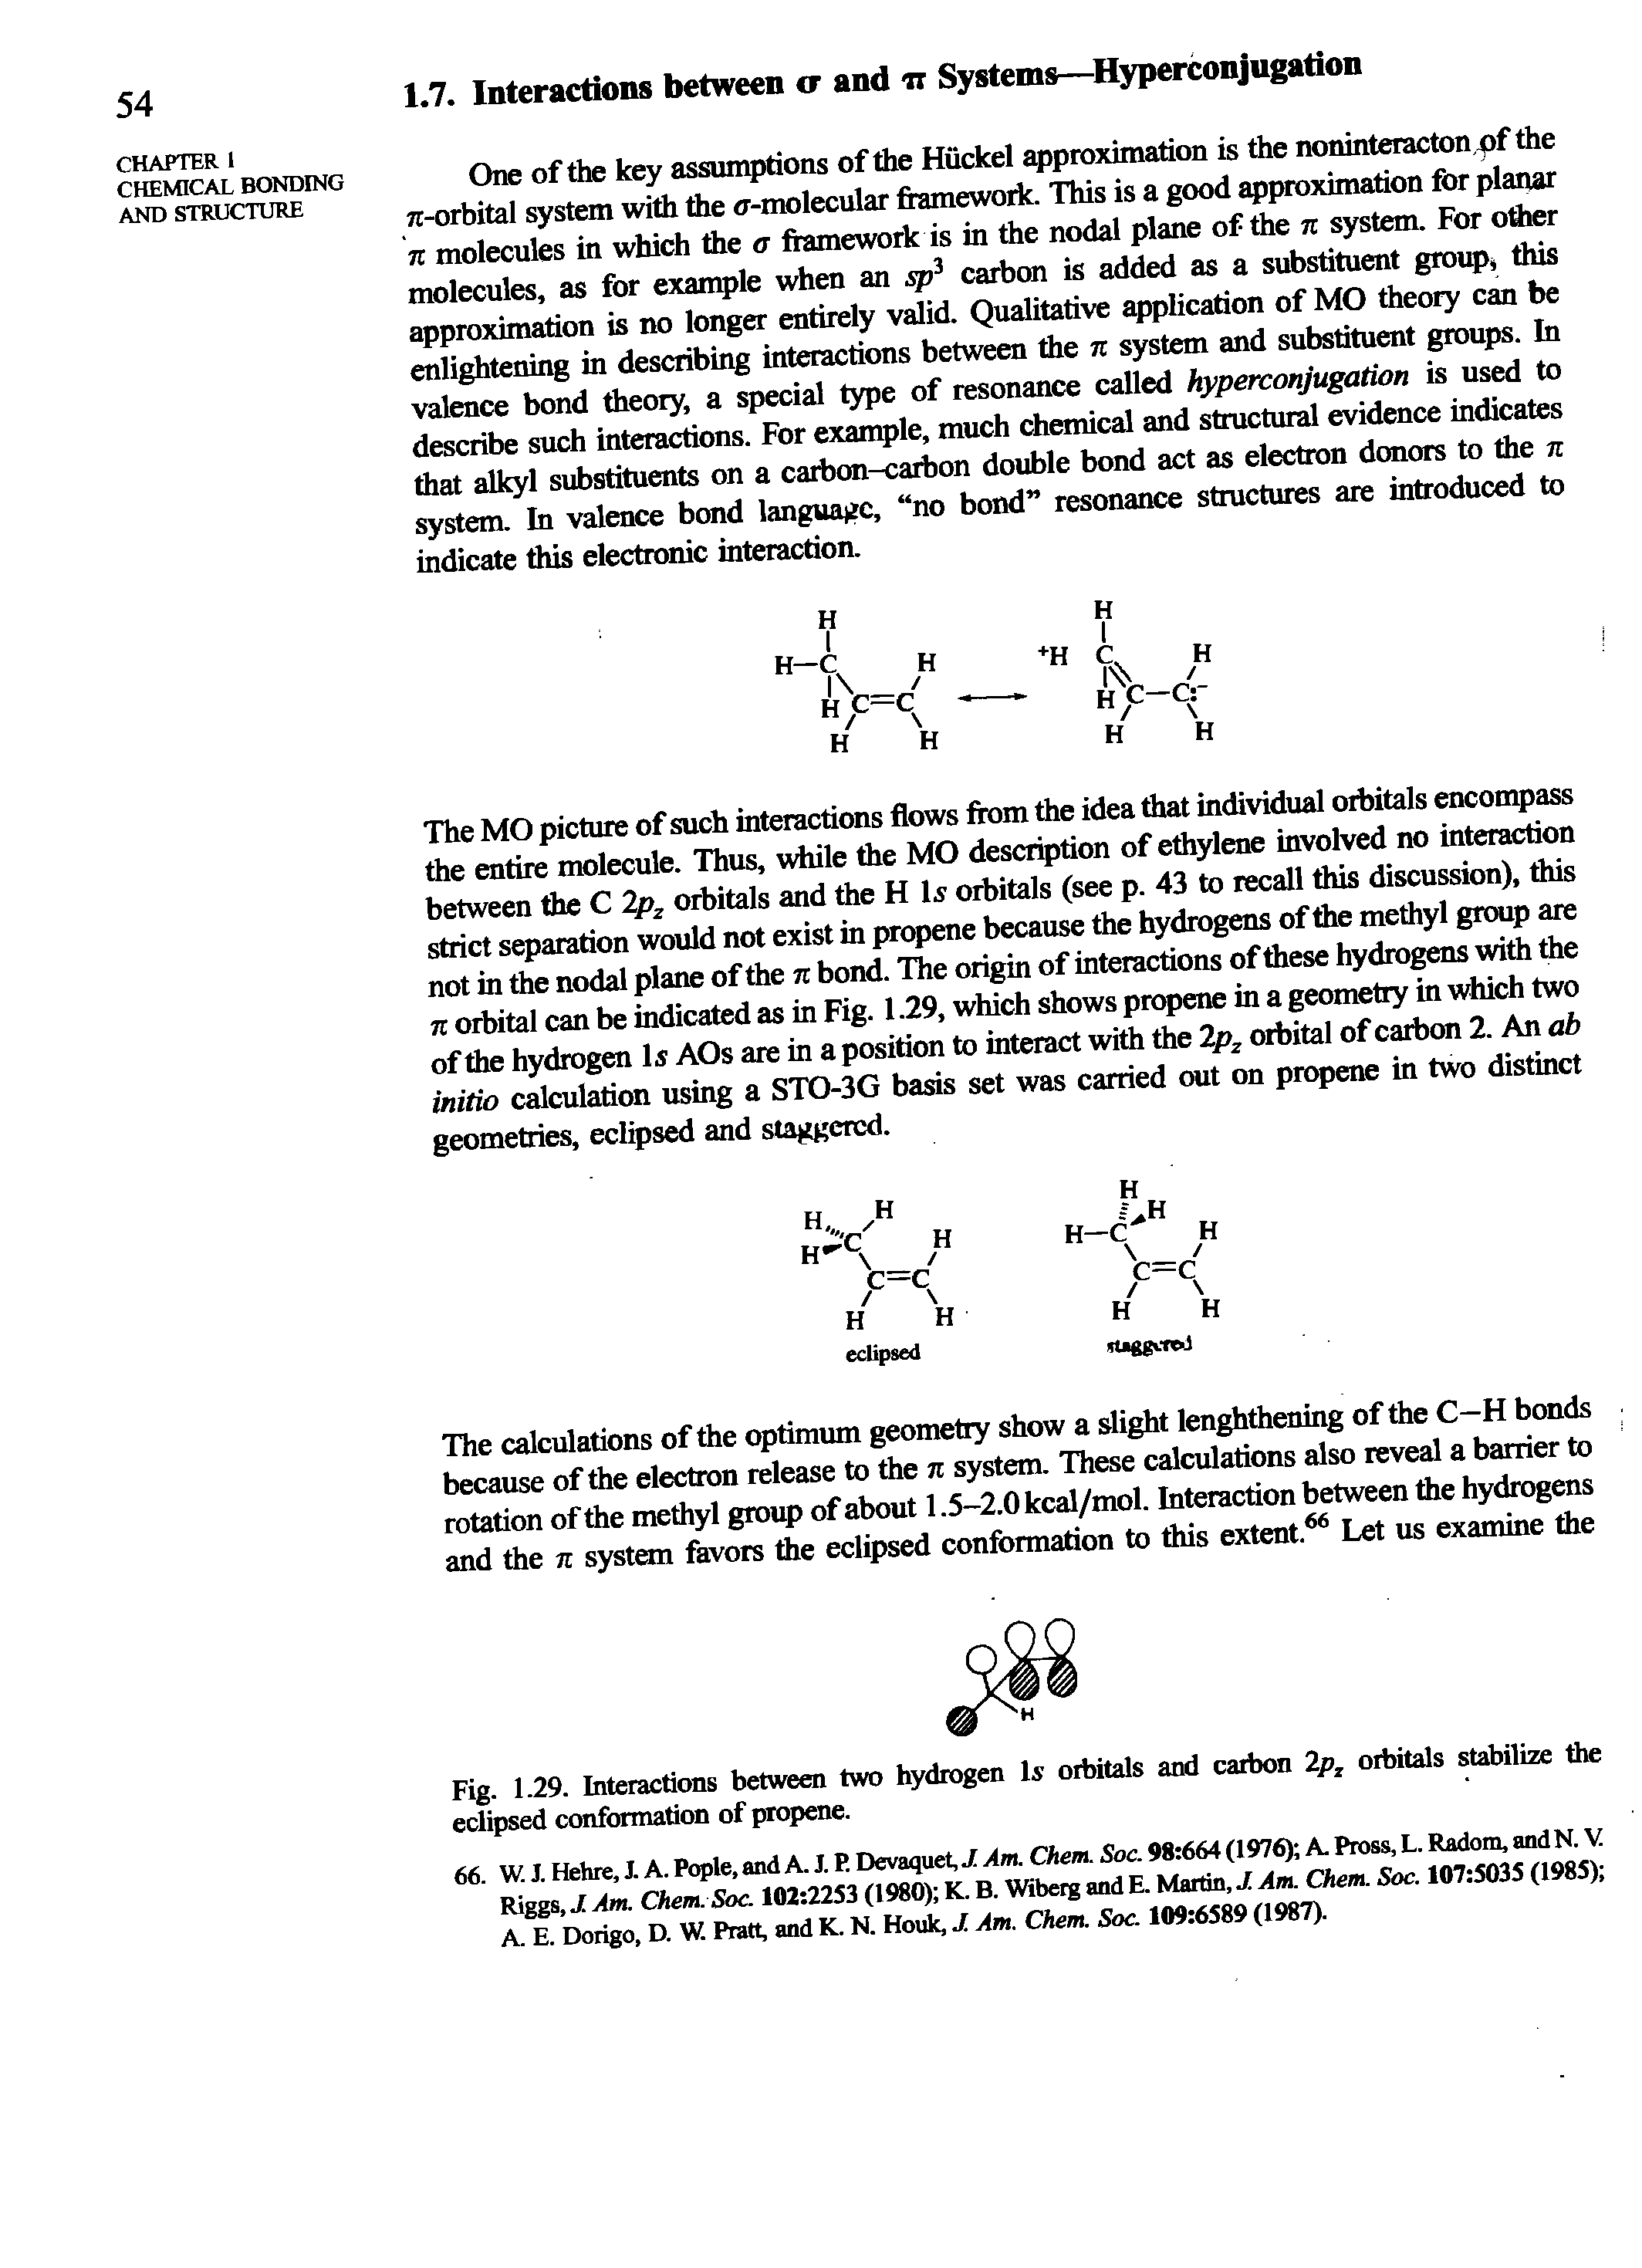 Fig. 1.29. Interactions between two hydrogen Is orbitals and carbon 2p orbitals stabilize the eclipsed confonnation of propene.